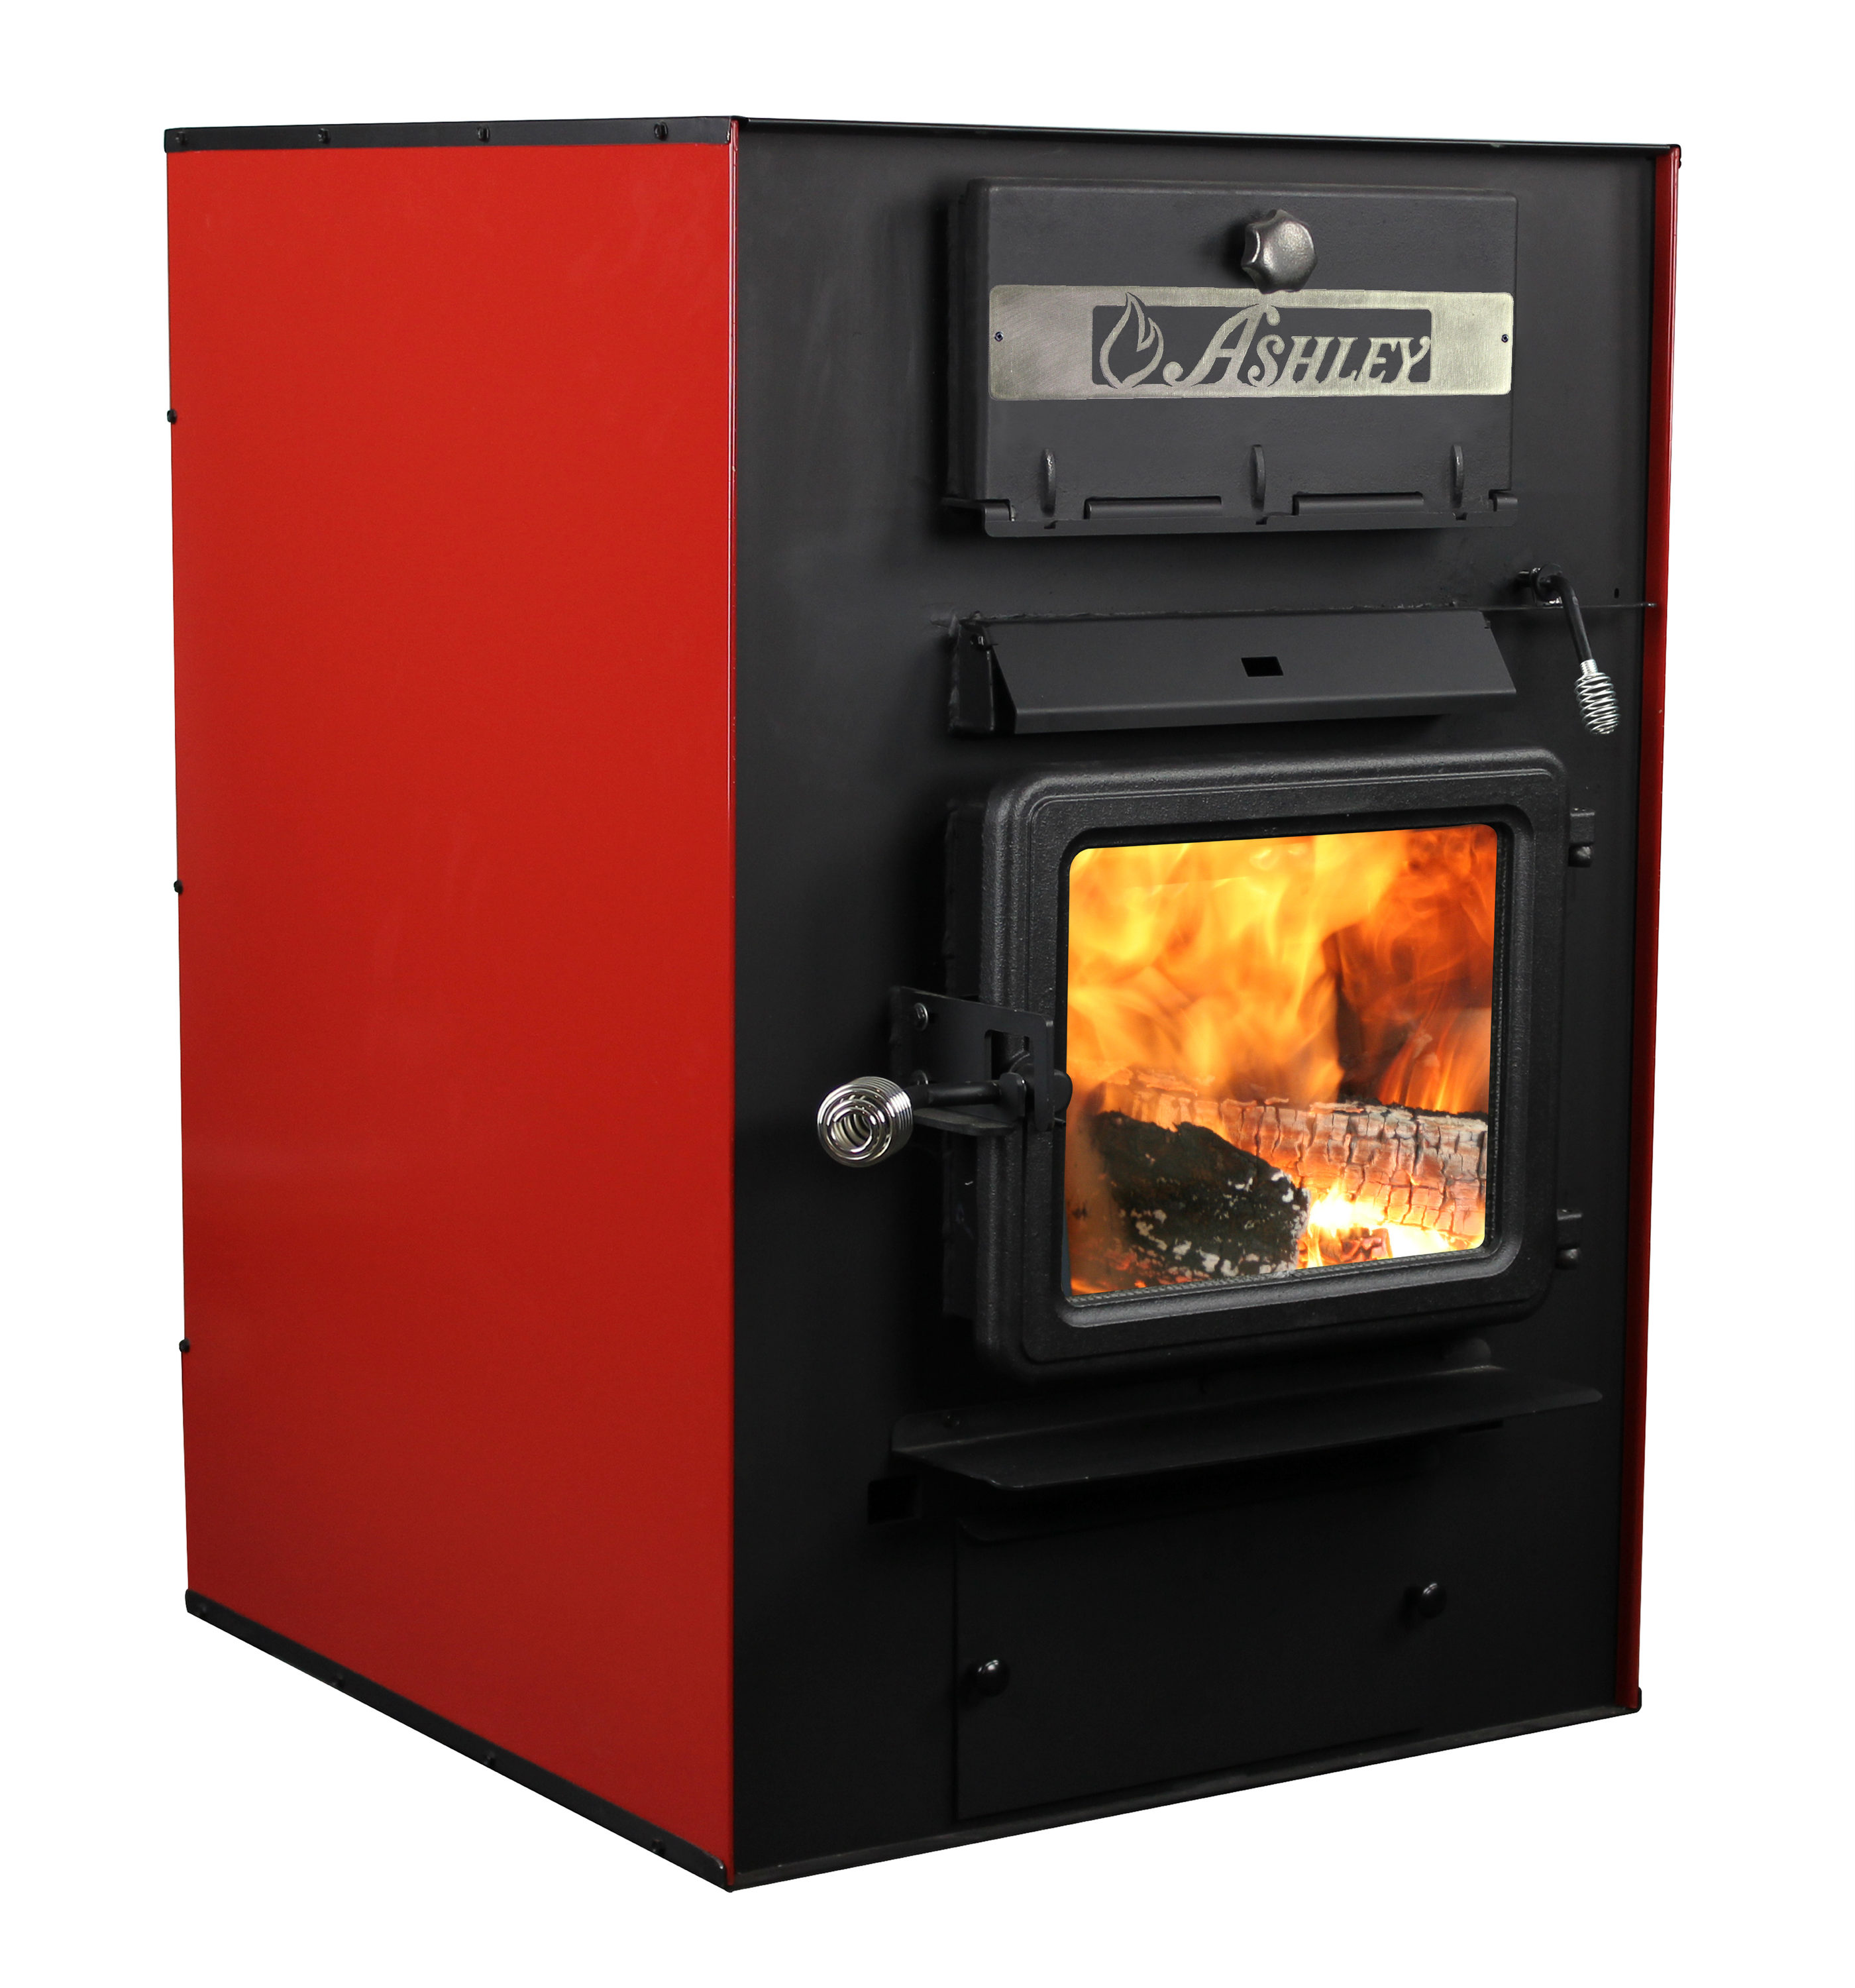 Ashley Hearth Products 2750-sq ft Furnace at